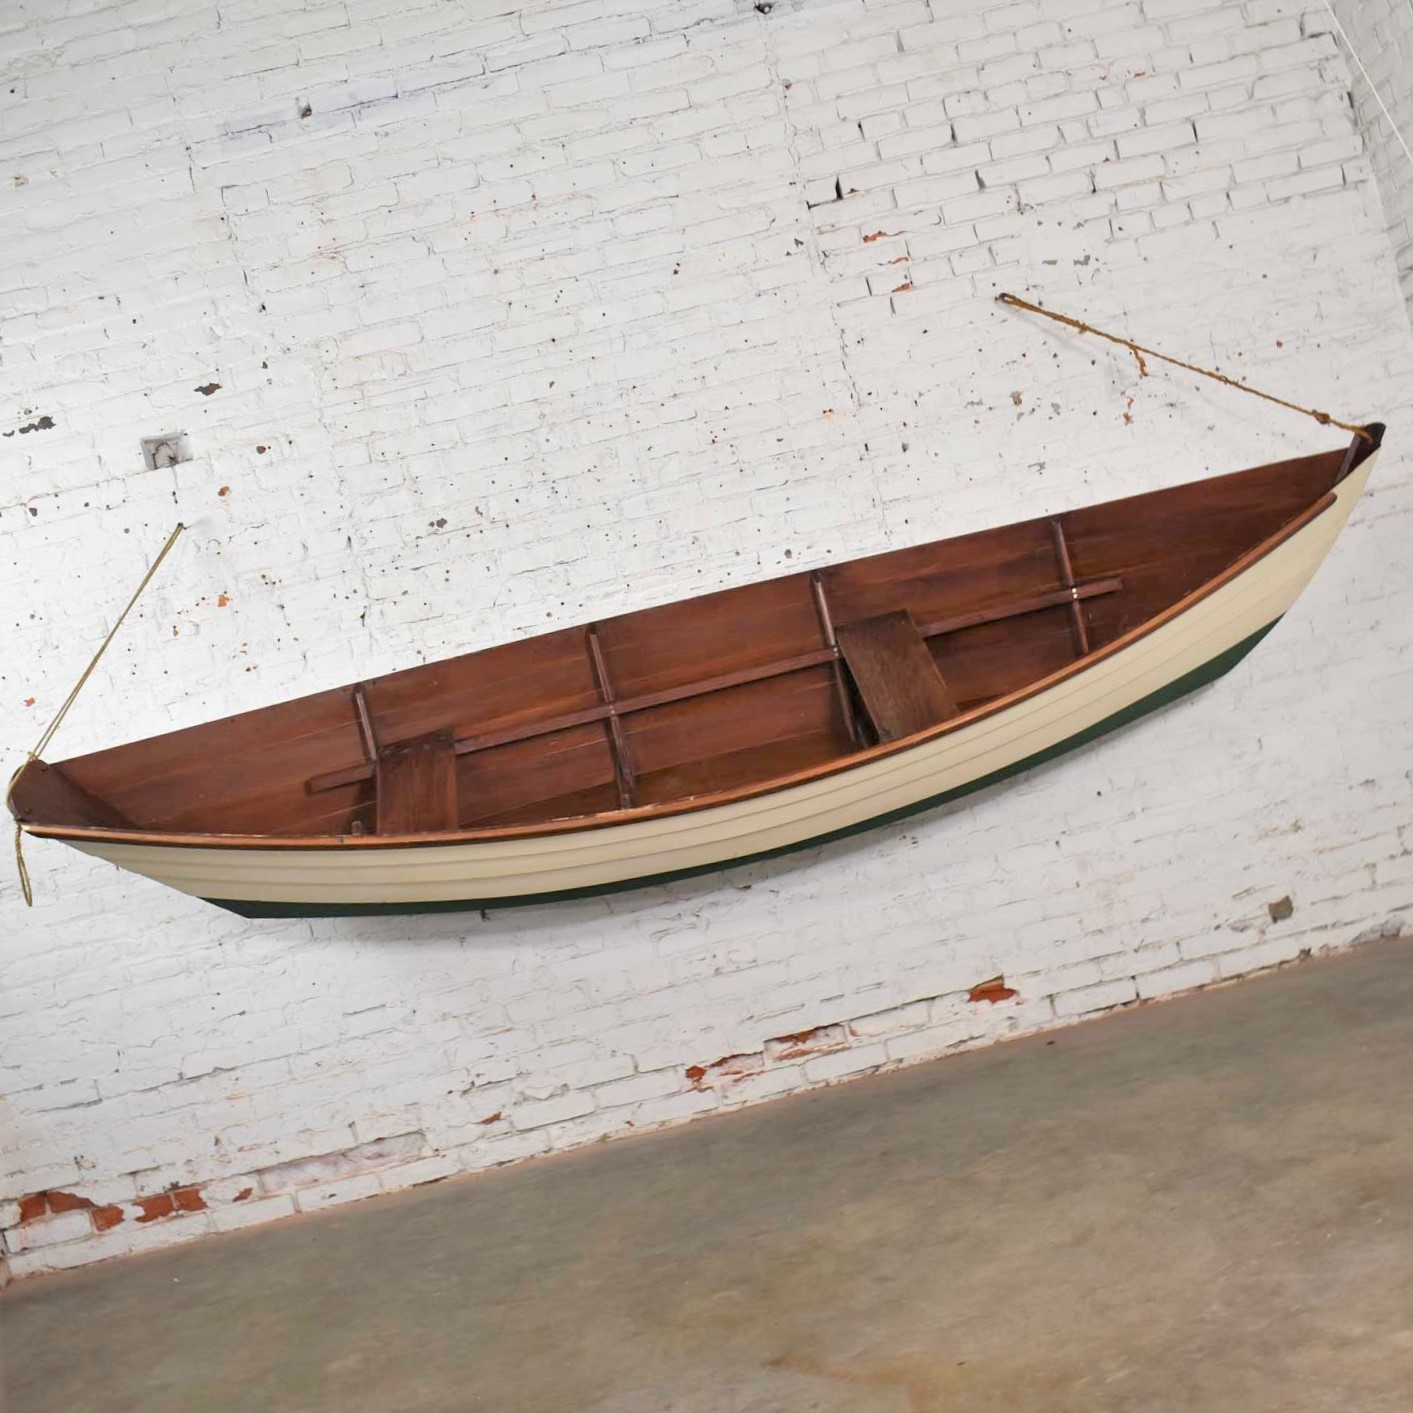 Vintage Wooden Rowboat for Maritime or Nautical Décor